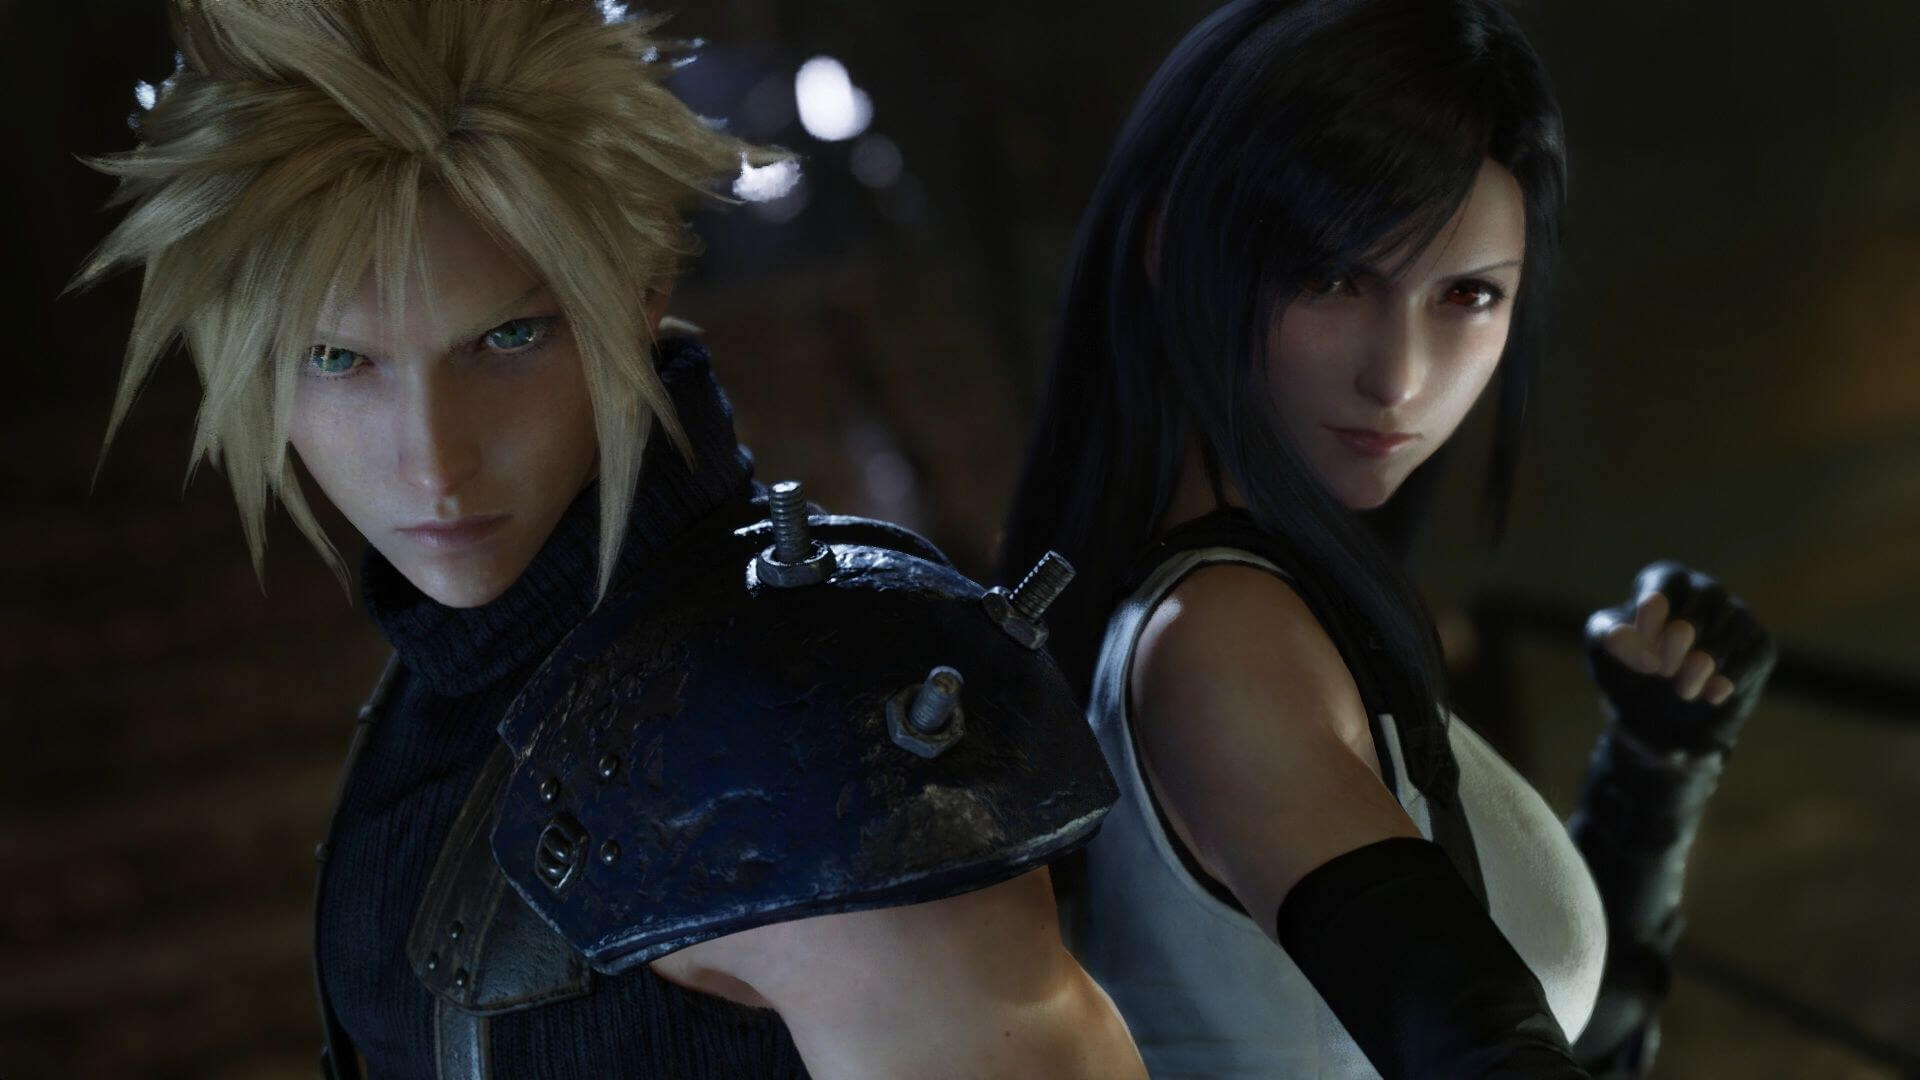 Final Fantasy VII Remake might see a launch on Xbox/PC on March 2021